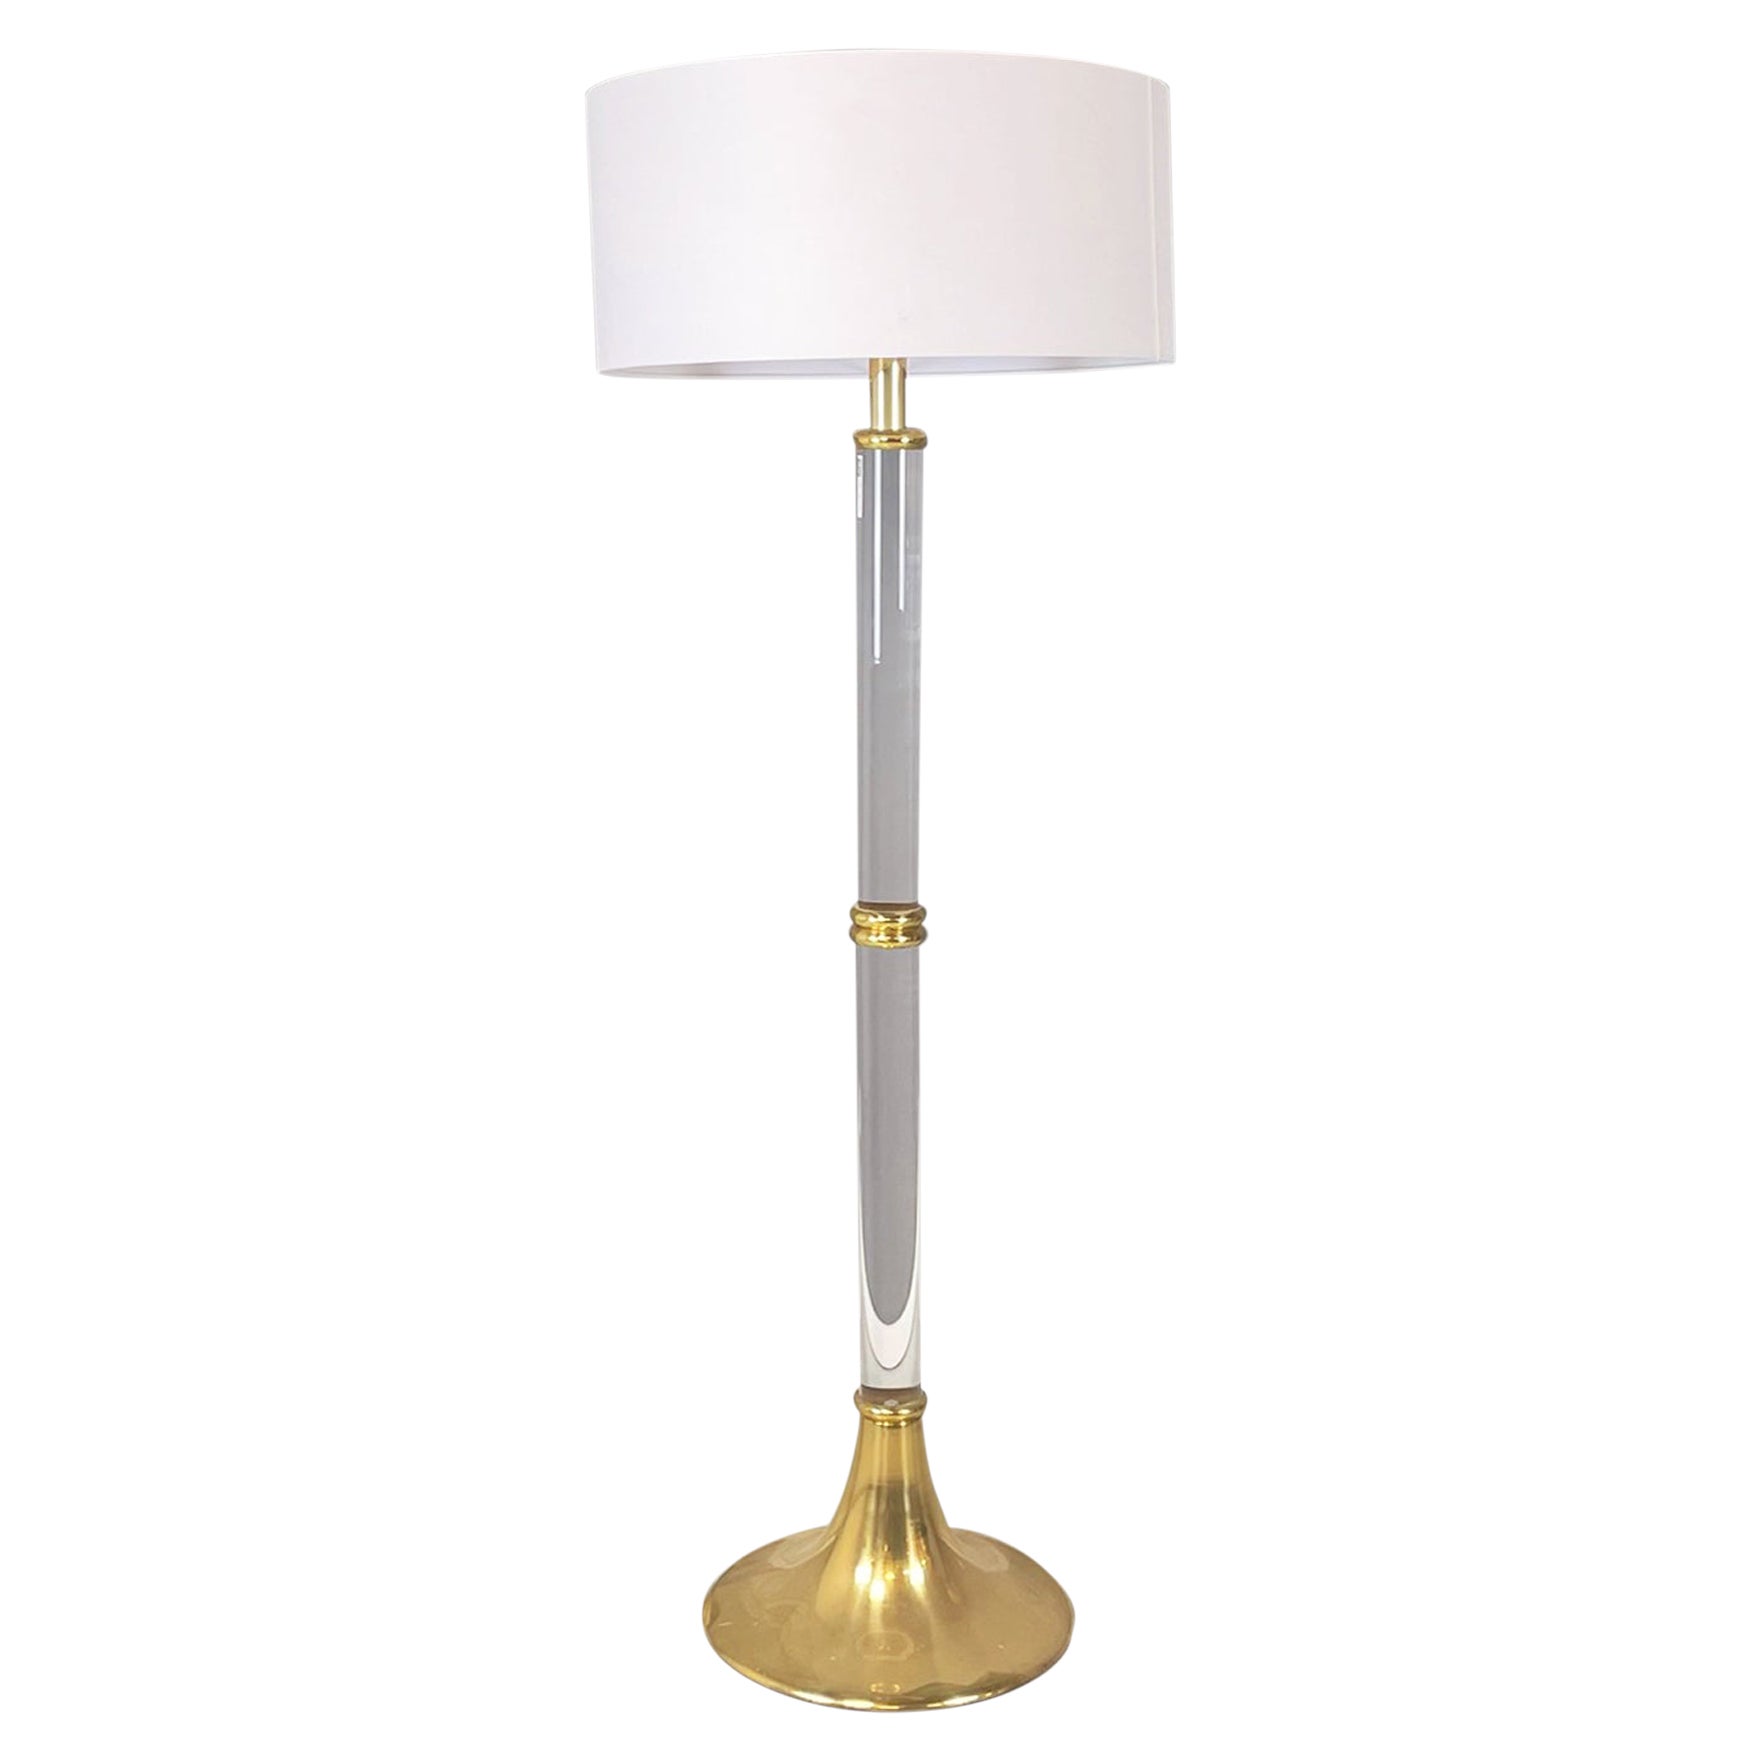 Italian Modern Floor Lamp in White Fabric Lampshade, Plexiglass and Brass, 1980s For Sale